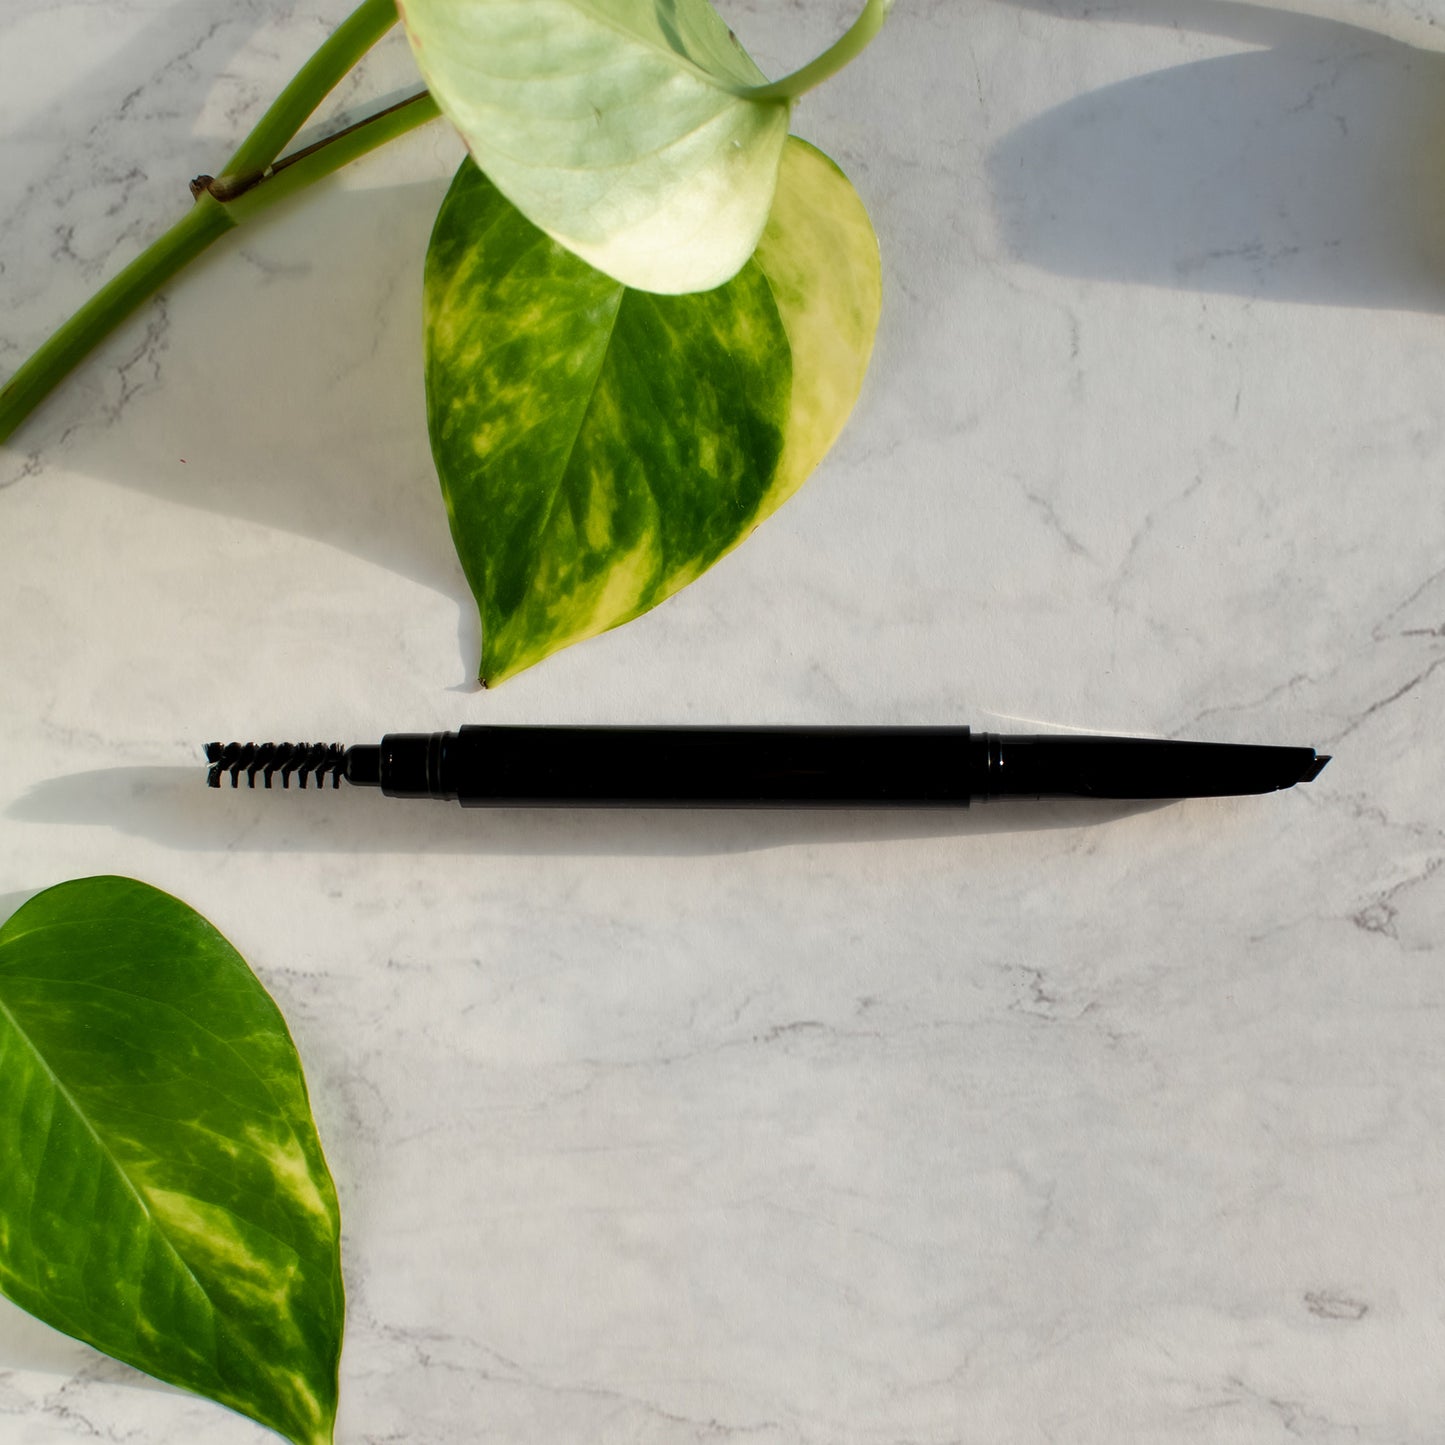 Take your brows to the next level with the Cruisin Organics Automatic Eyebrow Pencil in Brown. Get precise filling with the angled tip and seamless blending with the spooly tip. Formulated for lasting color, definition, and hold, this all-in-one pencil is perfect for creating a bold, natural brow look.